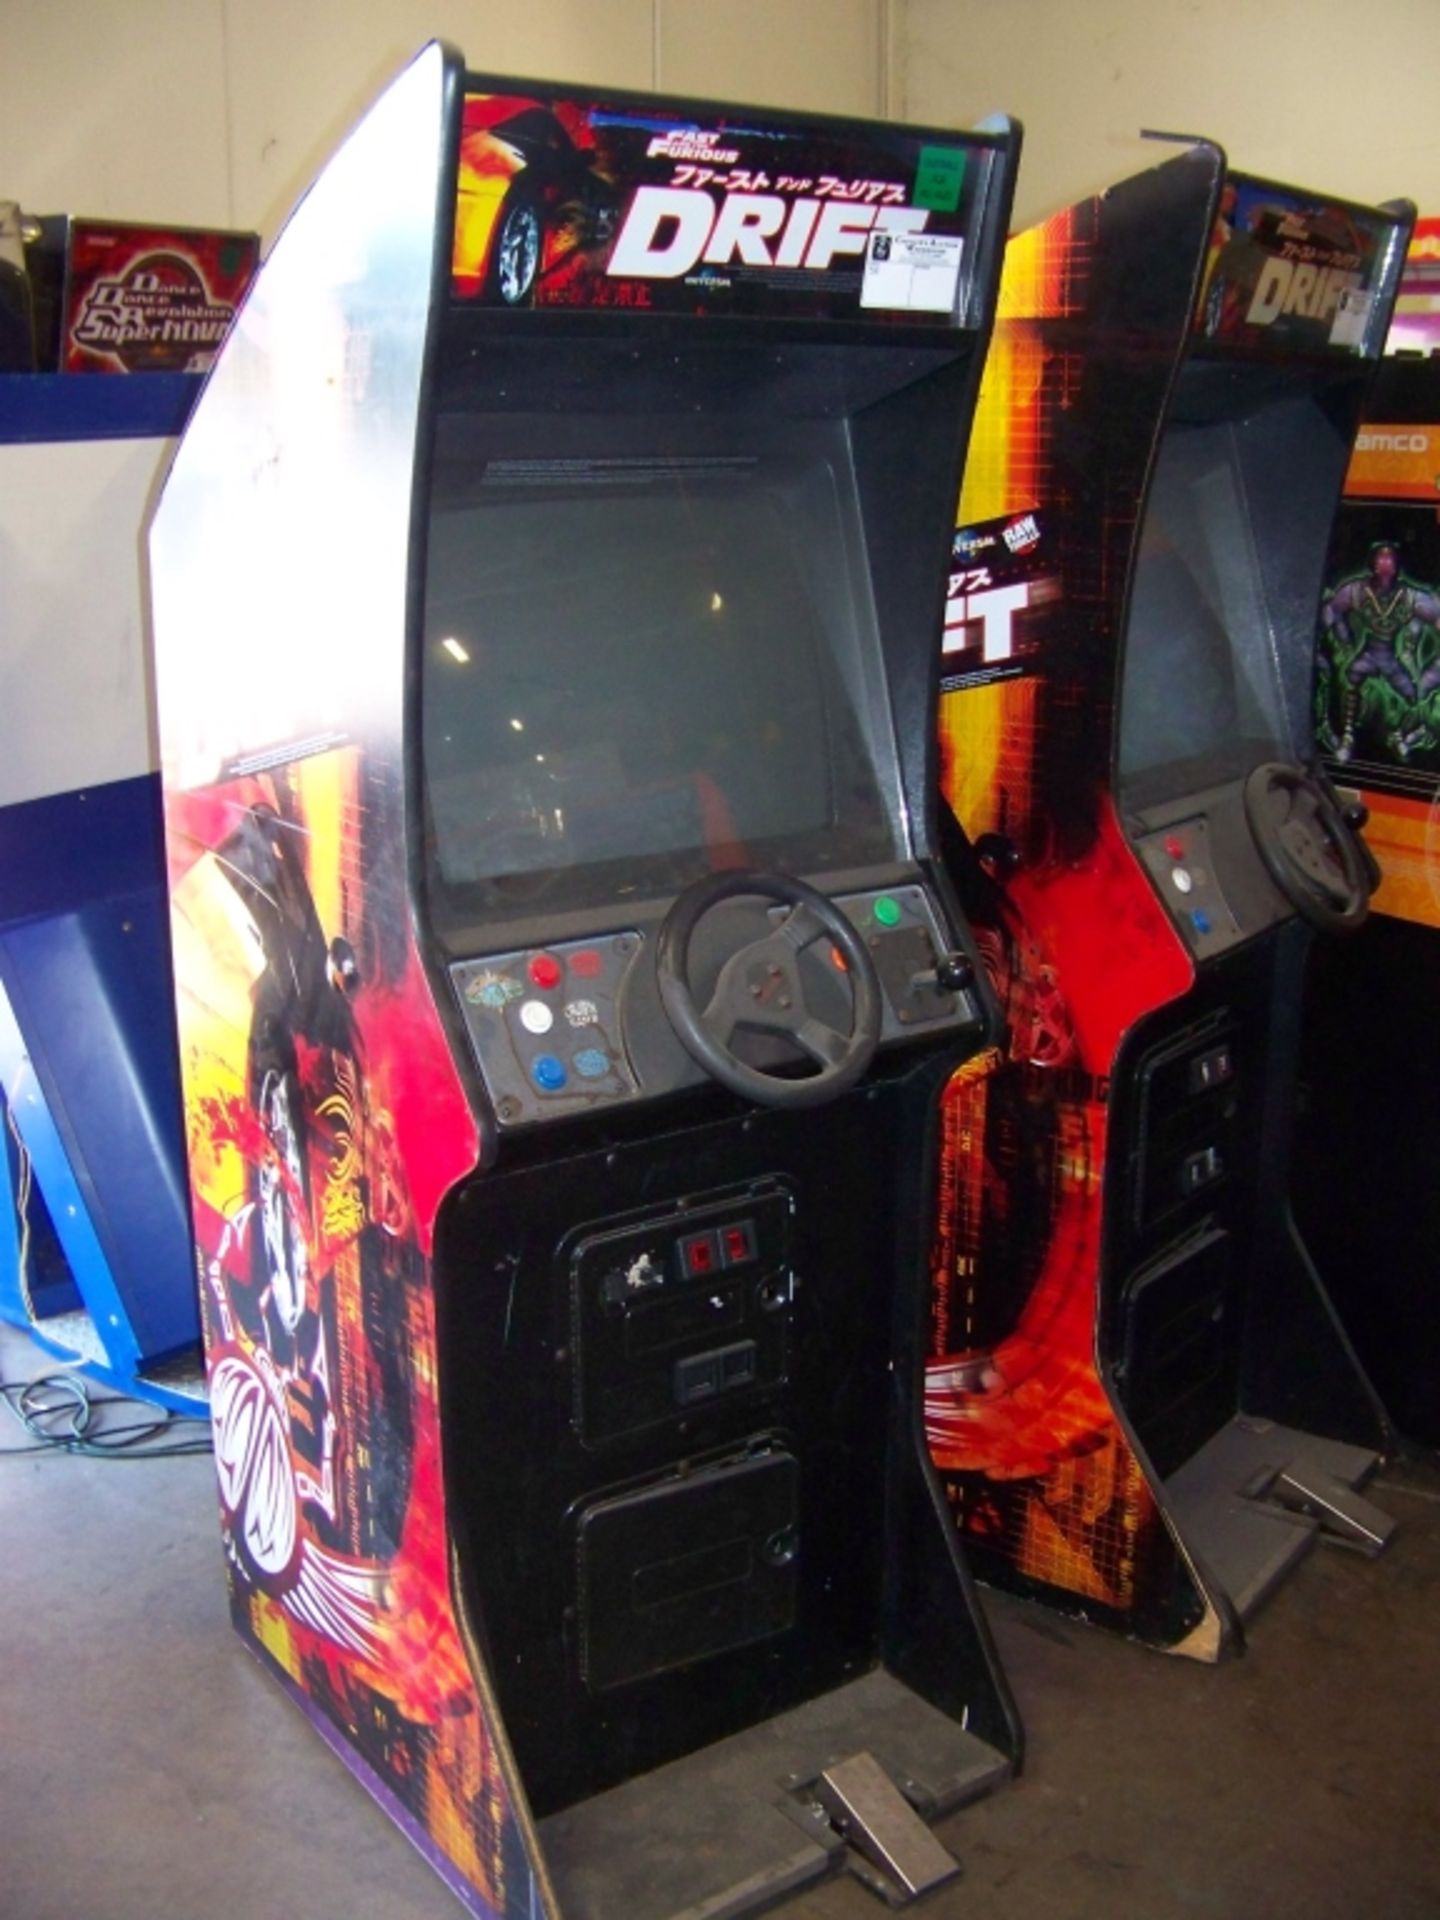 FAST & FURIOUS DRIFT UPRIGHT ARCADE GAME - Image 2 of 2